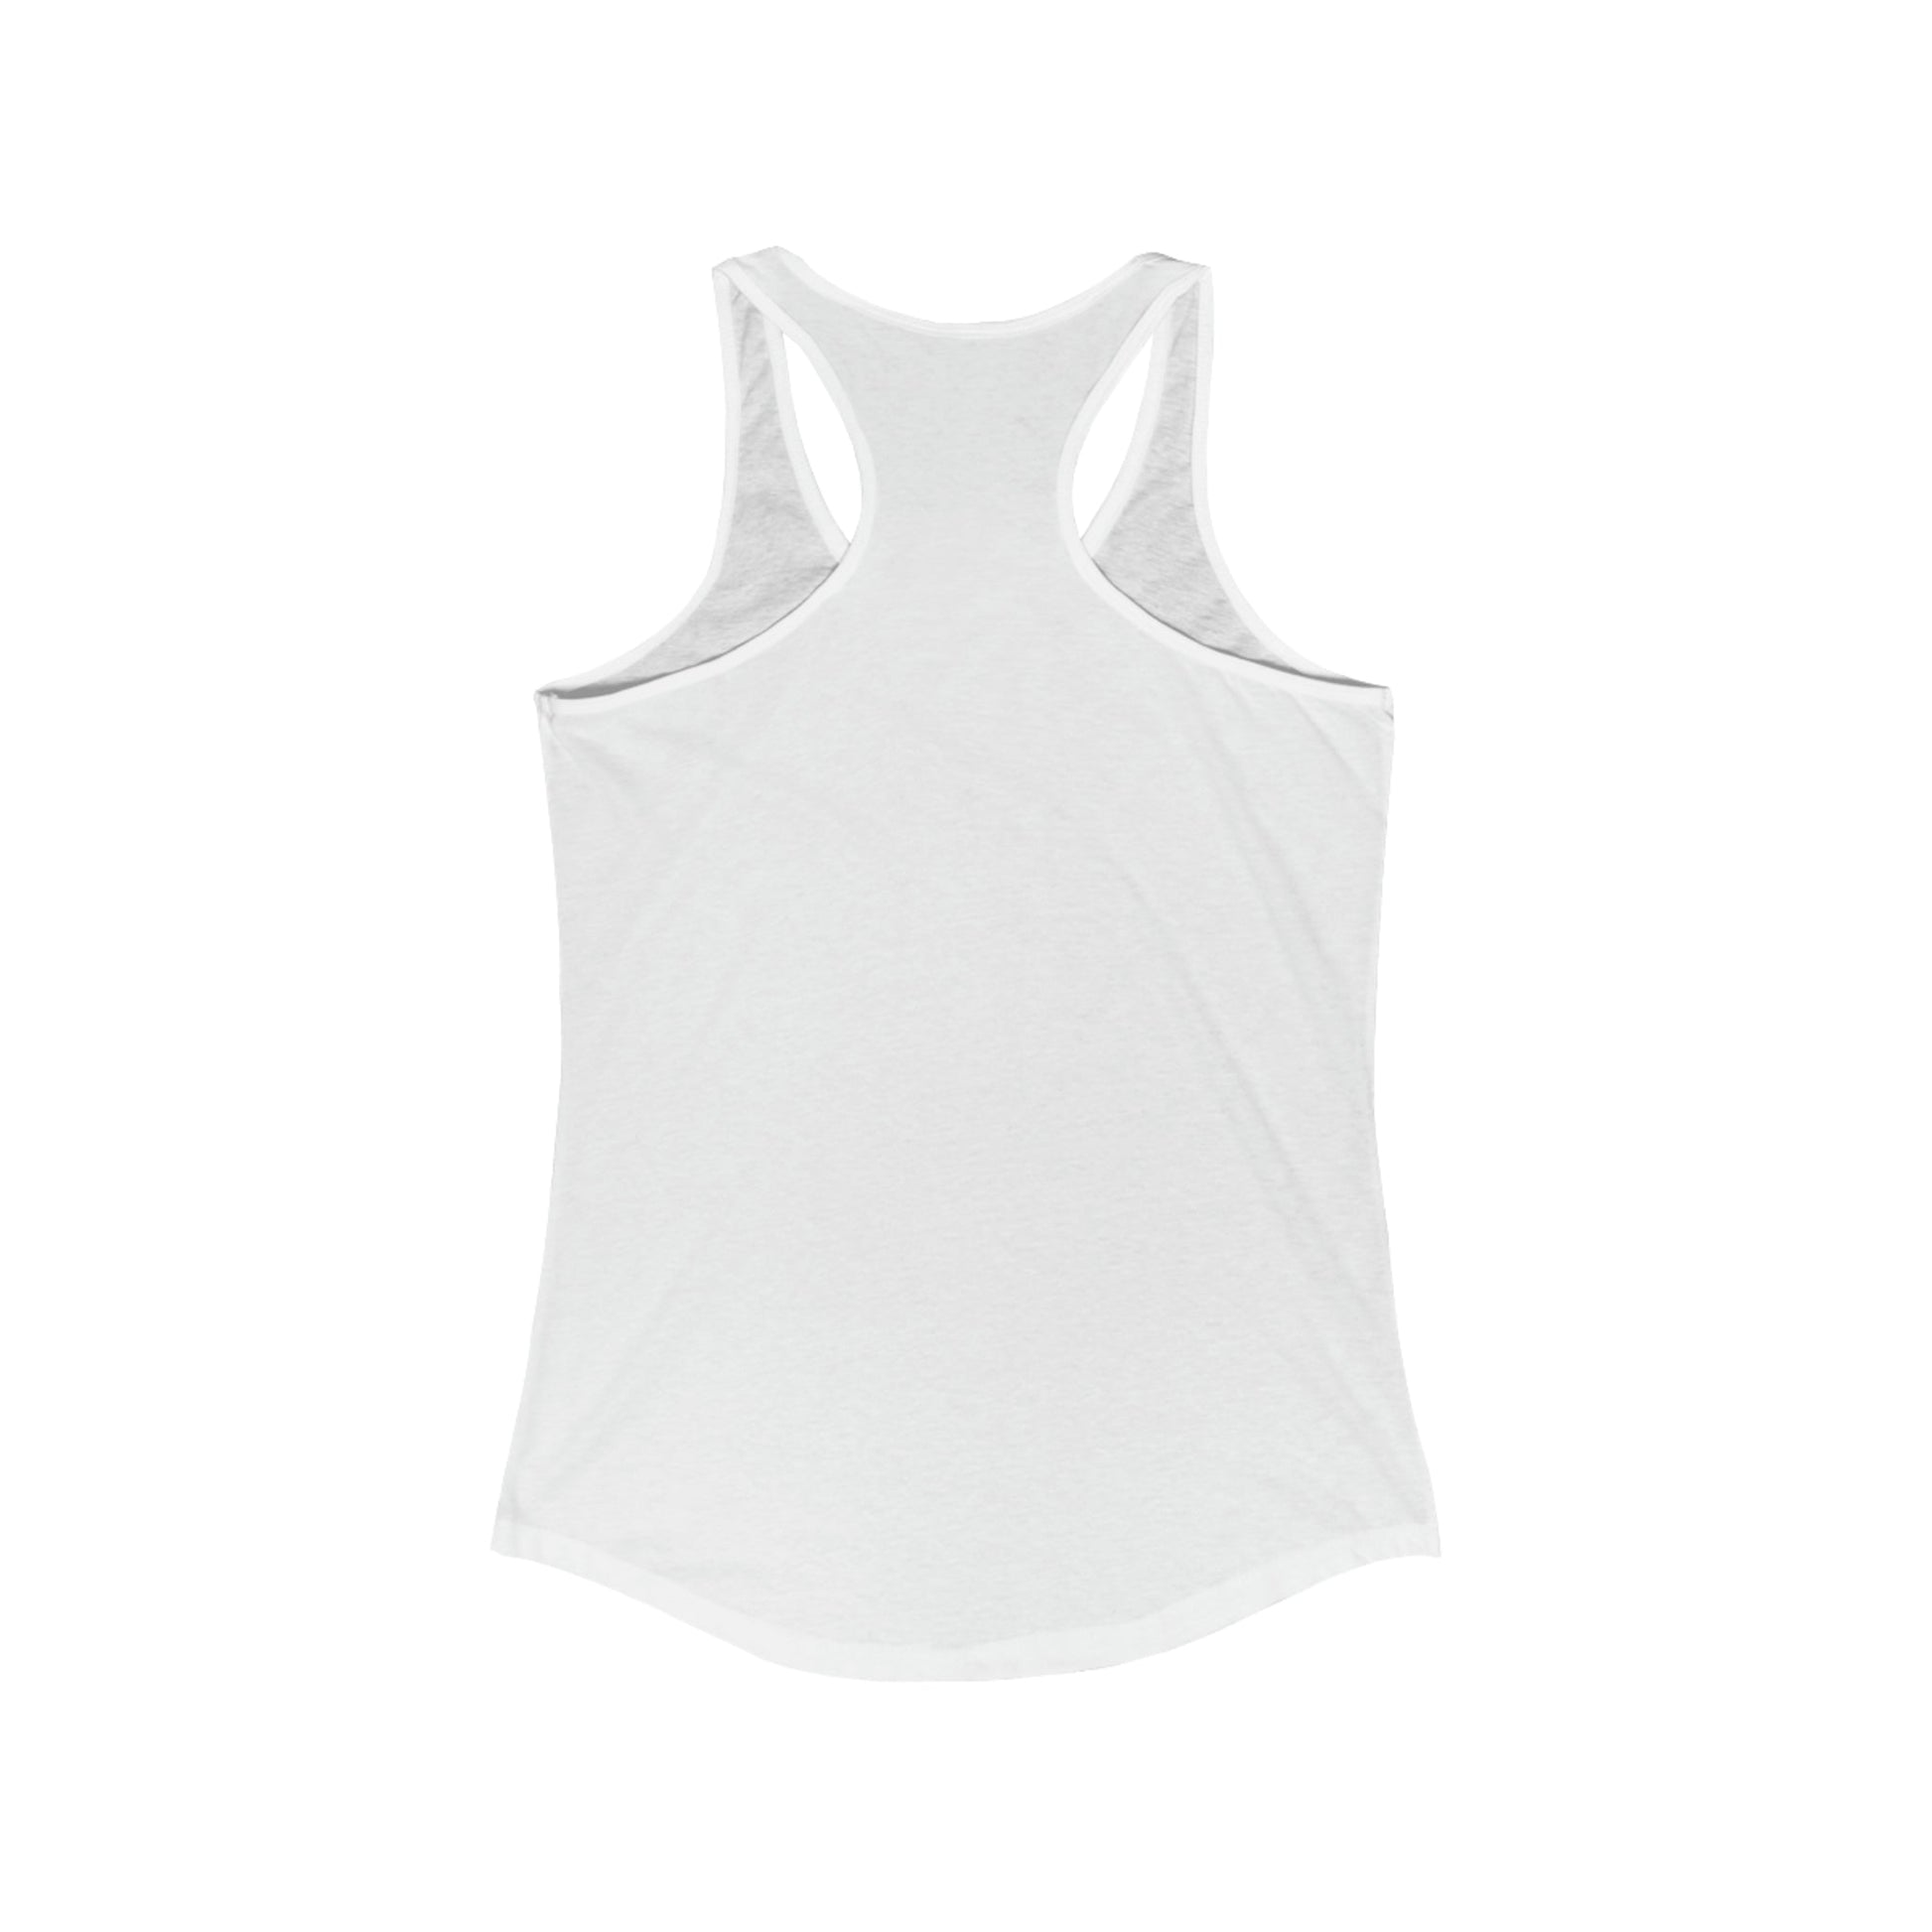 Amiable Women's Ideal Racerback Tank - Equiclient Apparel